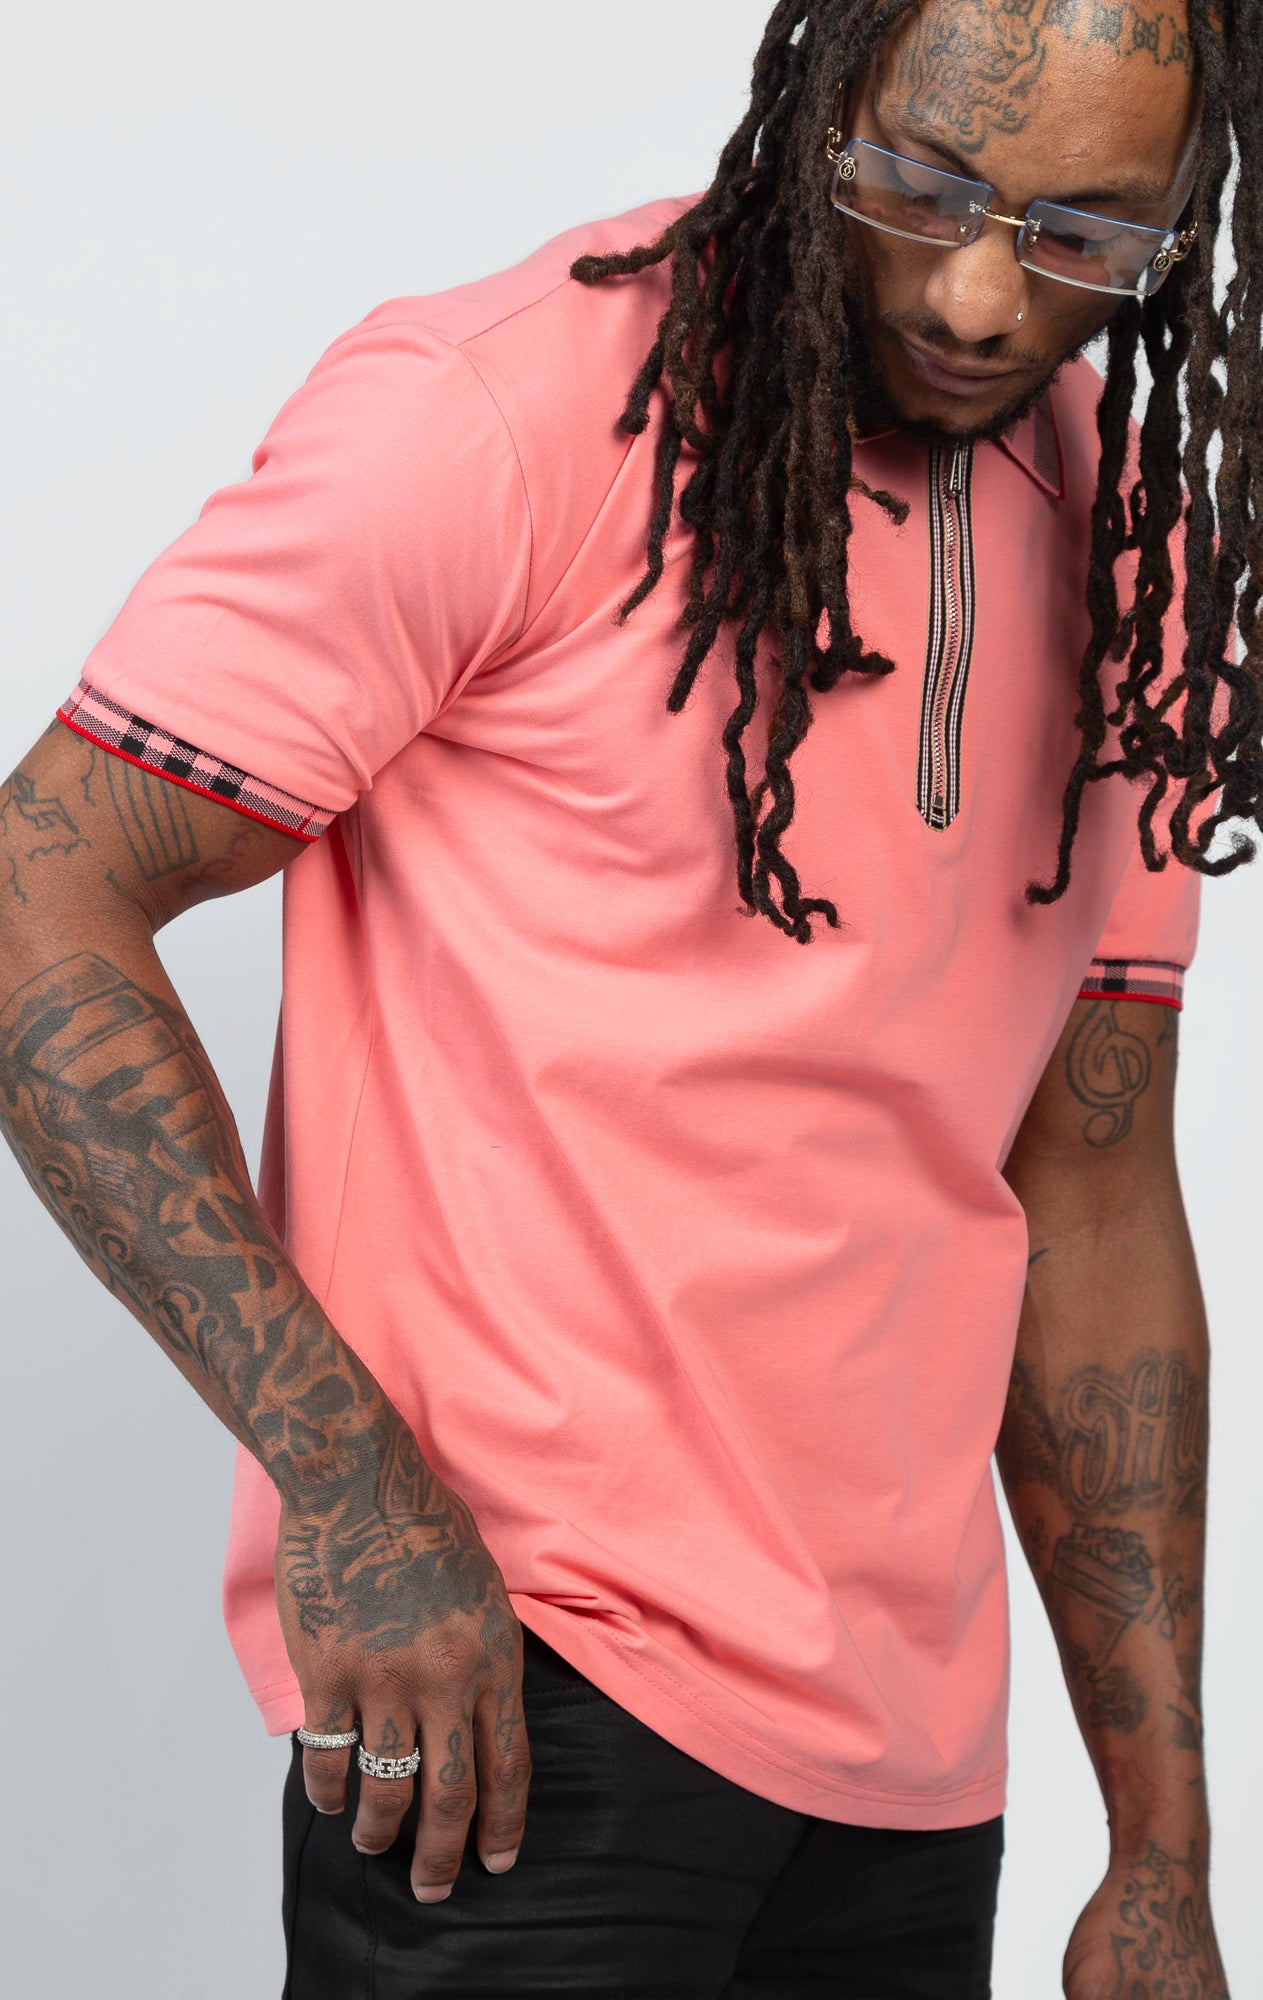 Short-sleeved polo shirt in vibrant coral color, featuring a modern front zipper.